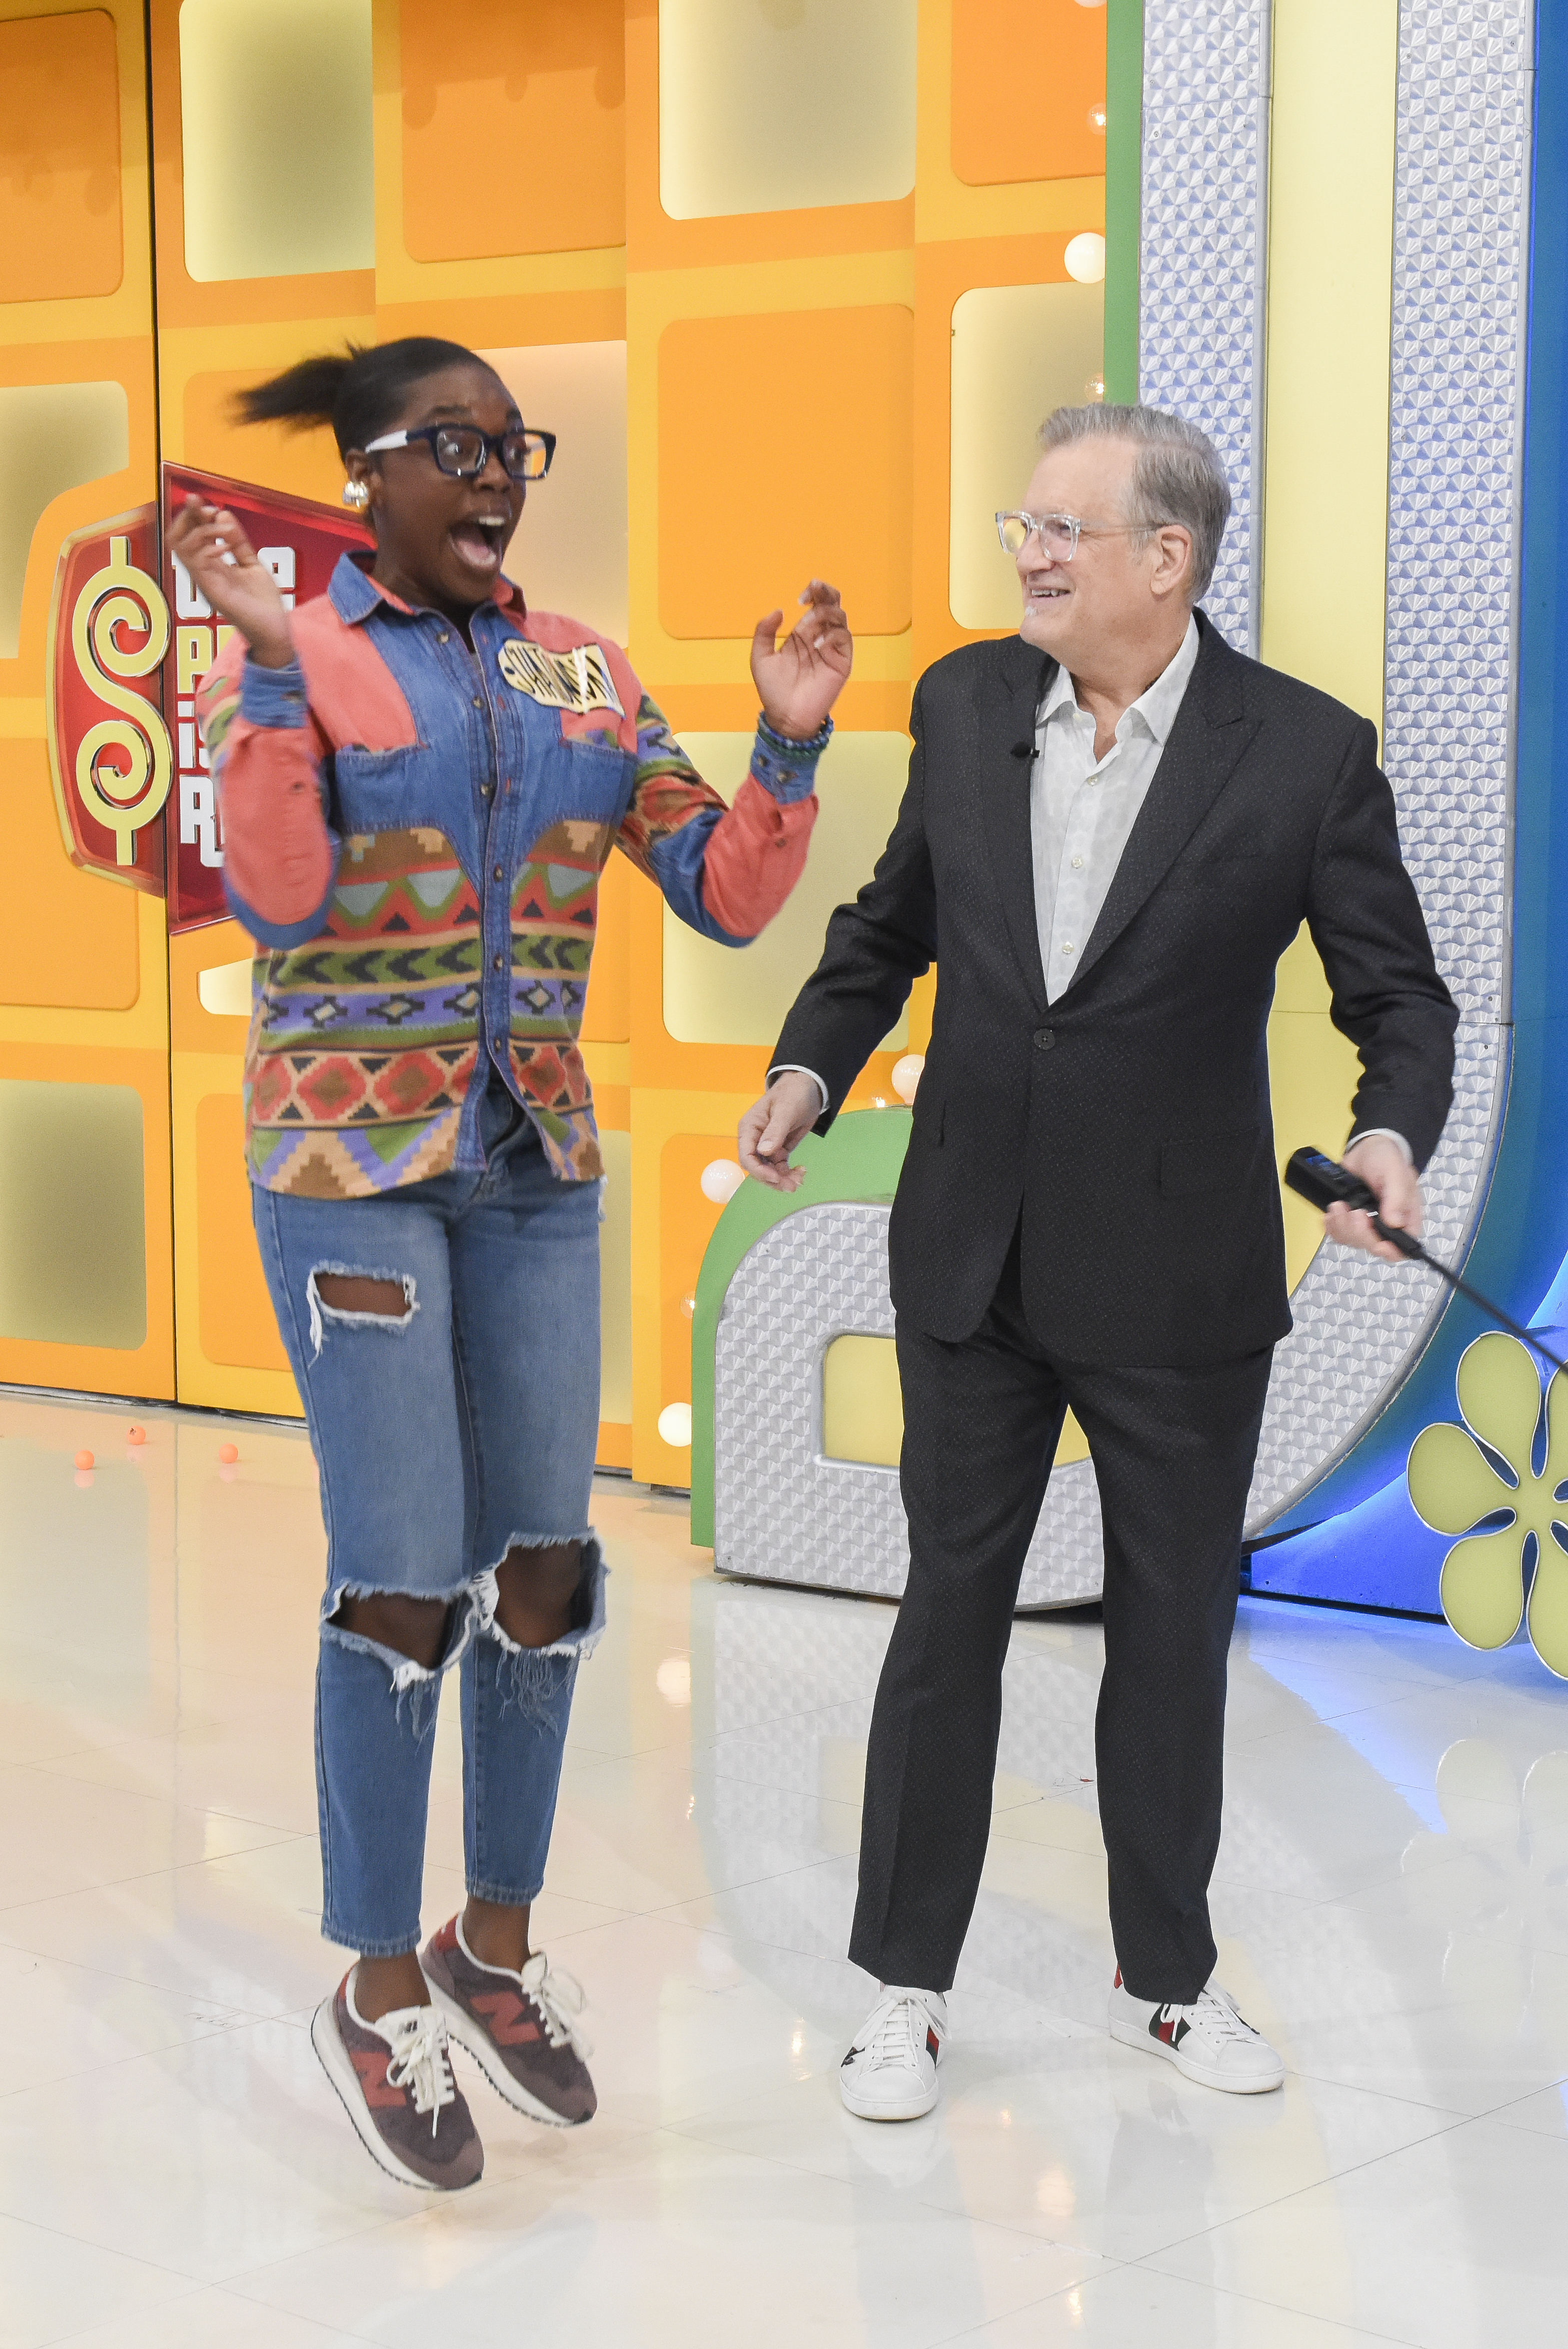 Drew Carey pictured with an overexcited contestant on The Price is Right Set